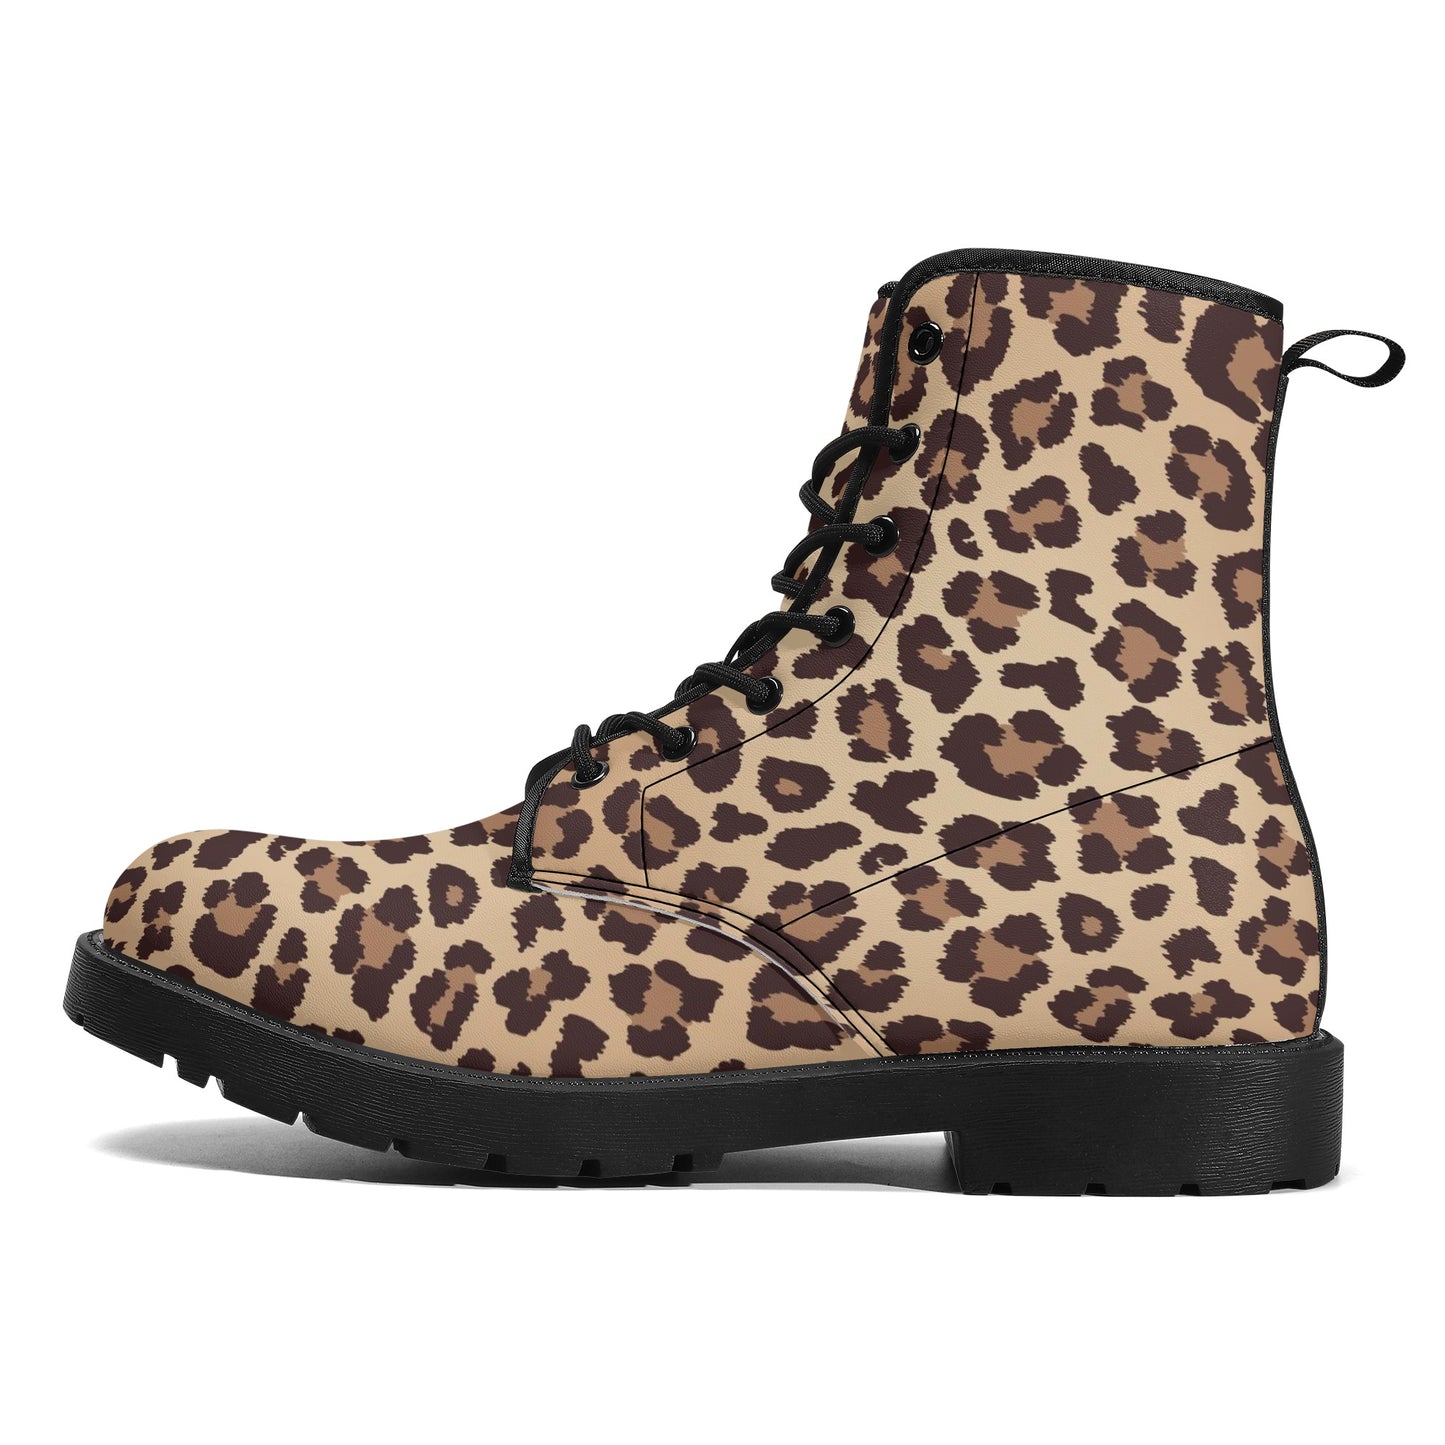 Leopard Men Leather Boots, Animal Print Cheetah Vegan Lace Up Shoes Hiking Festival Black Ankle Combat Work Winter Waterproof Custom Gift Starcove Fashion